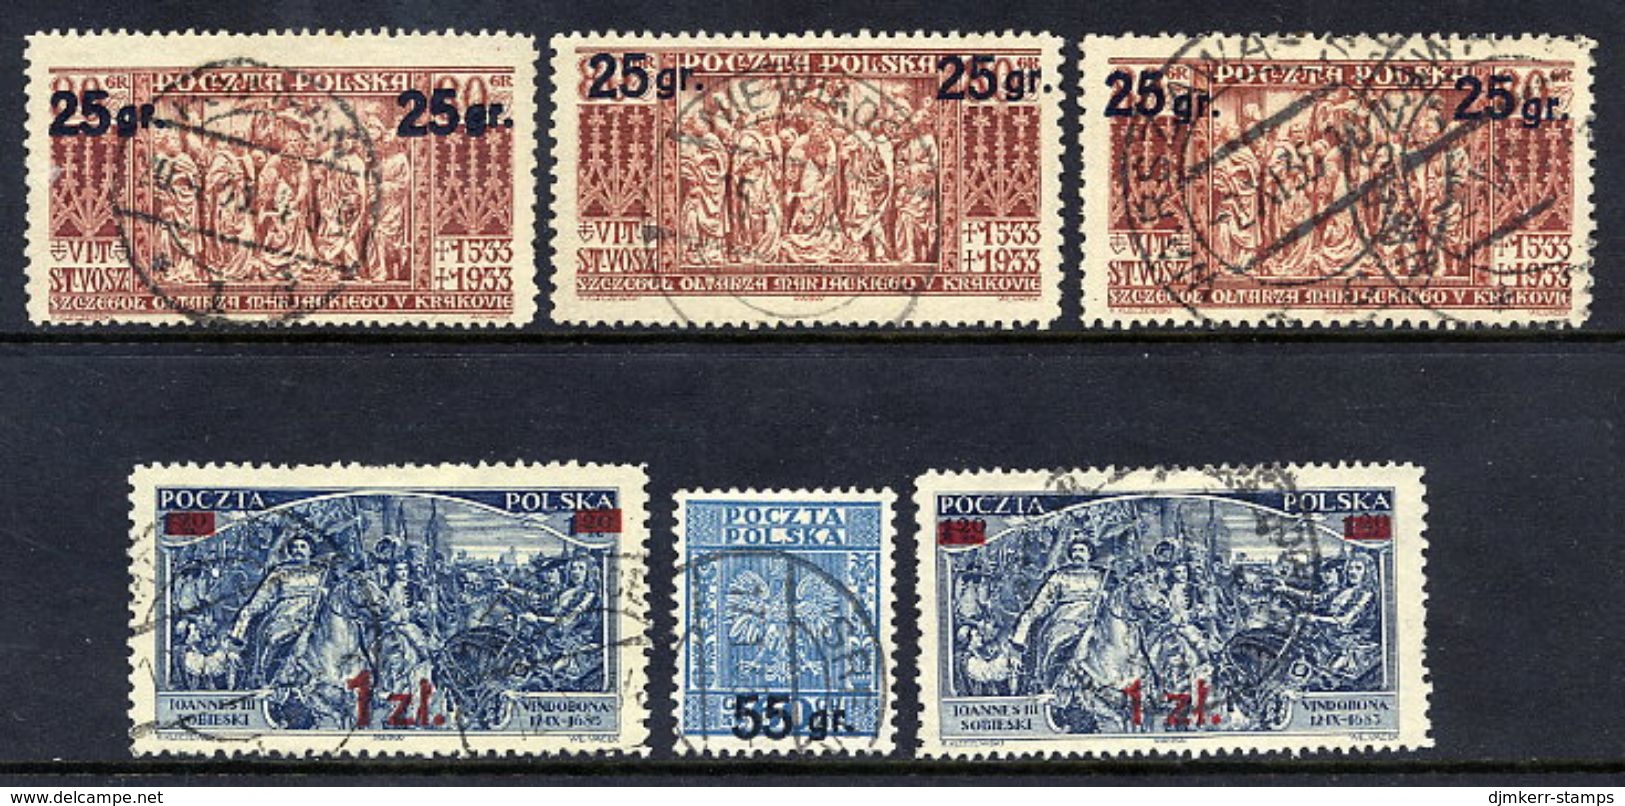 POLAND 1934 Surcharges With All Types, Used.  Michel 291 IA+B, 291 II, 292, 293 I+II - Oblitérés